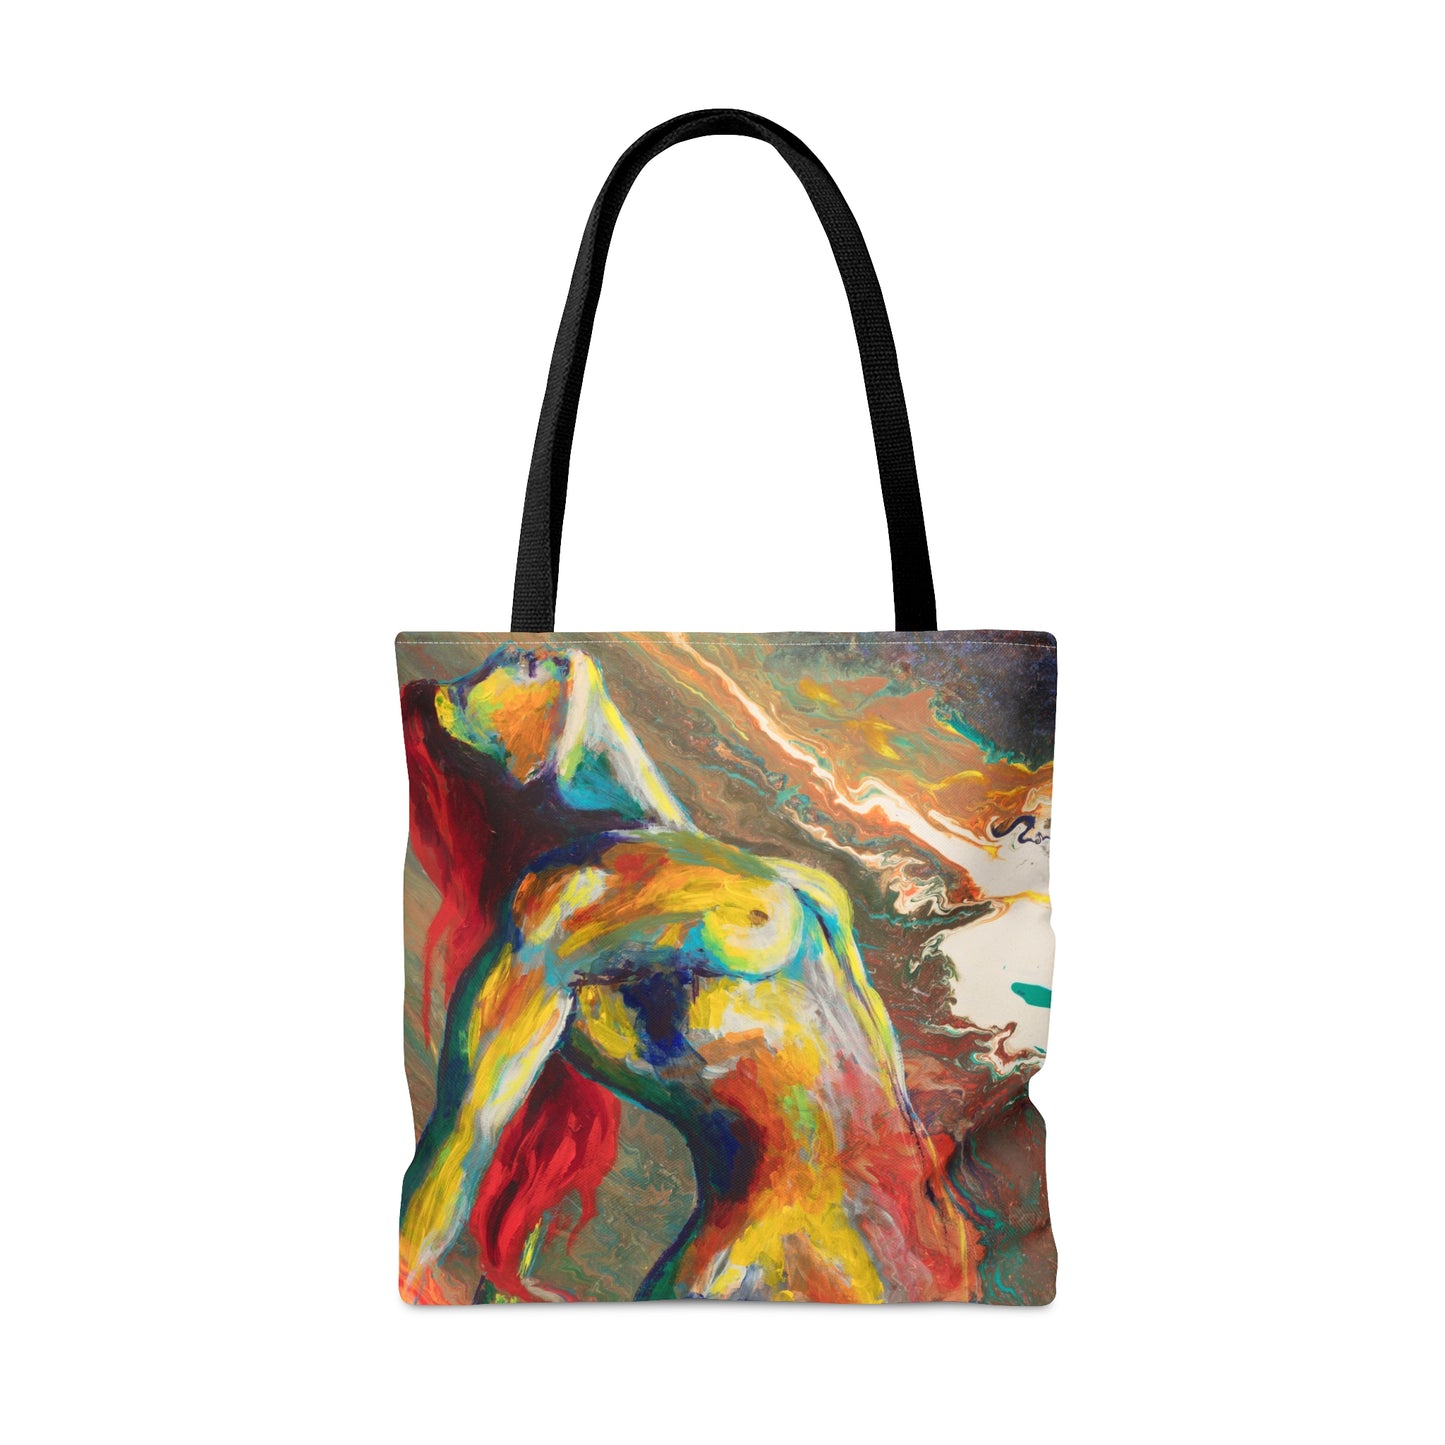 Inspiration Tote Bag, 18 x 17 in